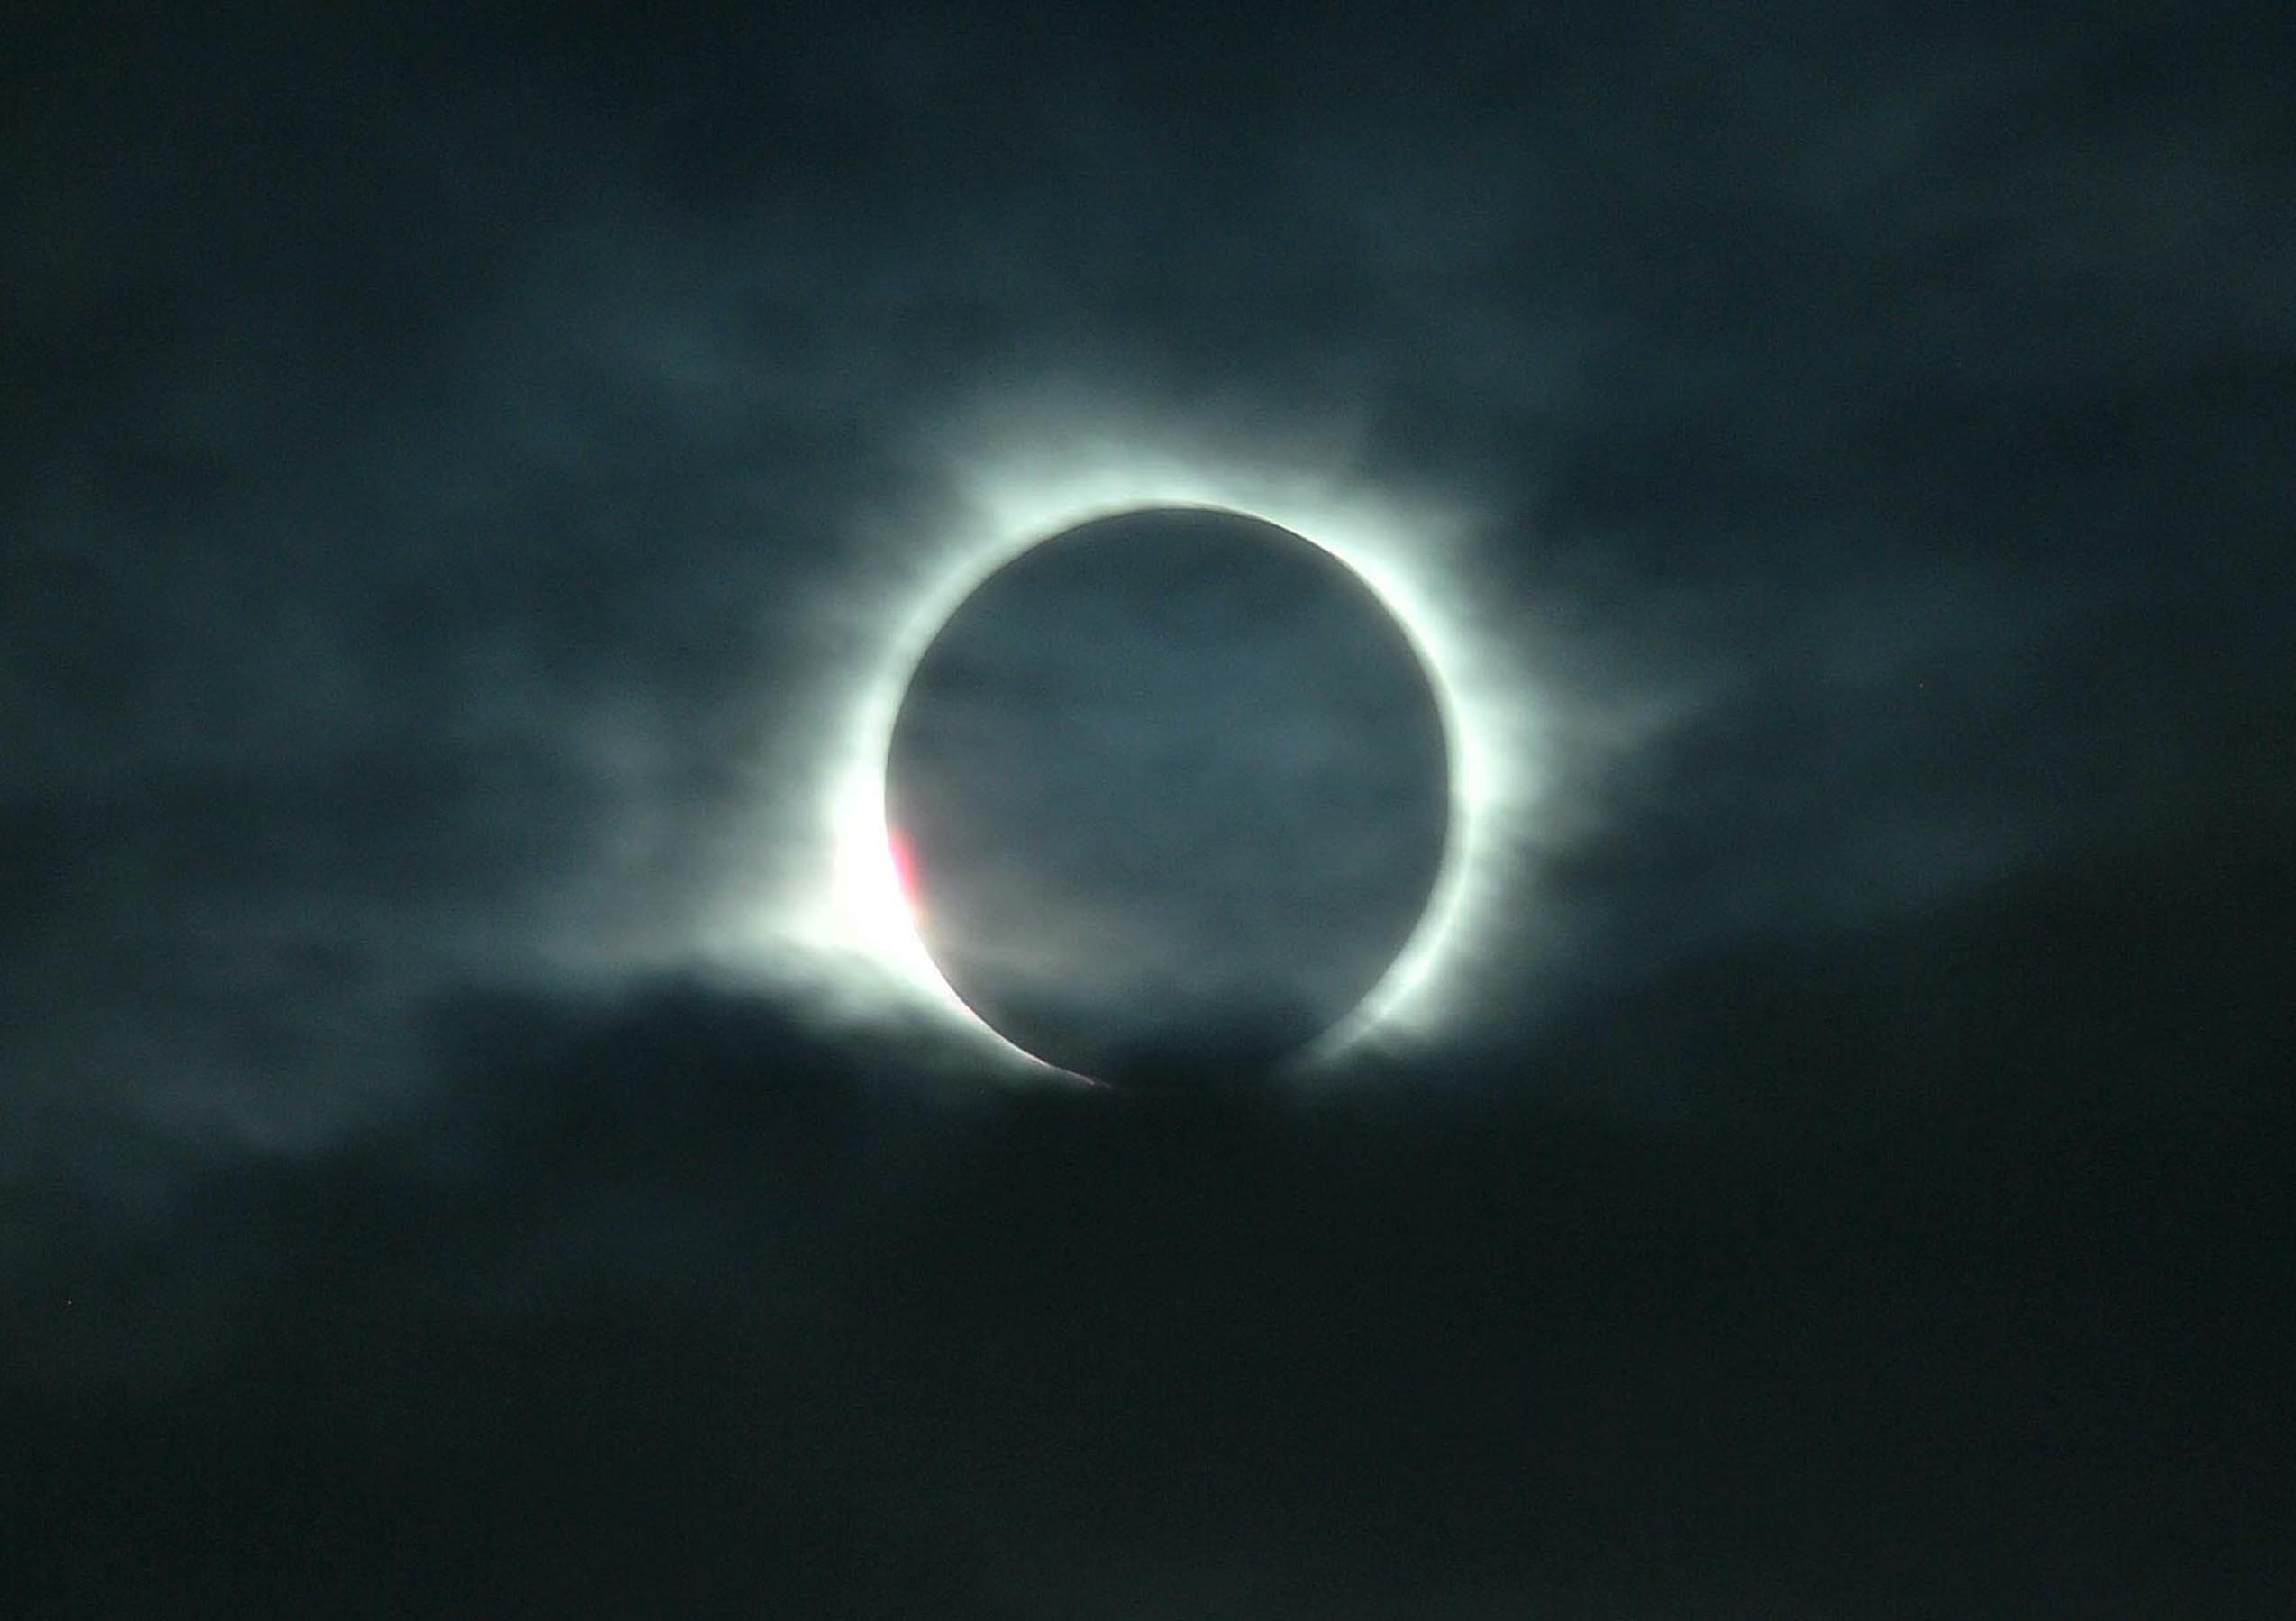 A total solar eclipse is visible from Belitung. Indonesia on March 9.